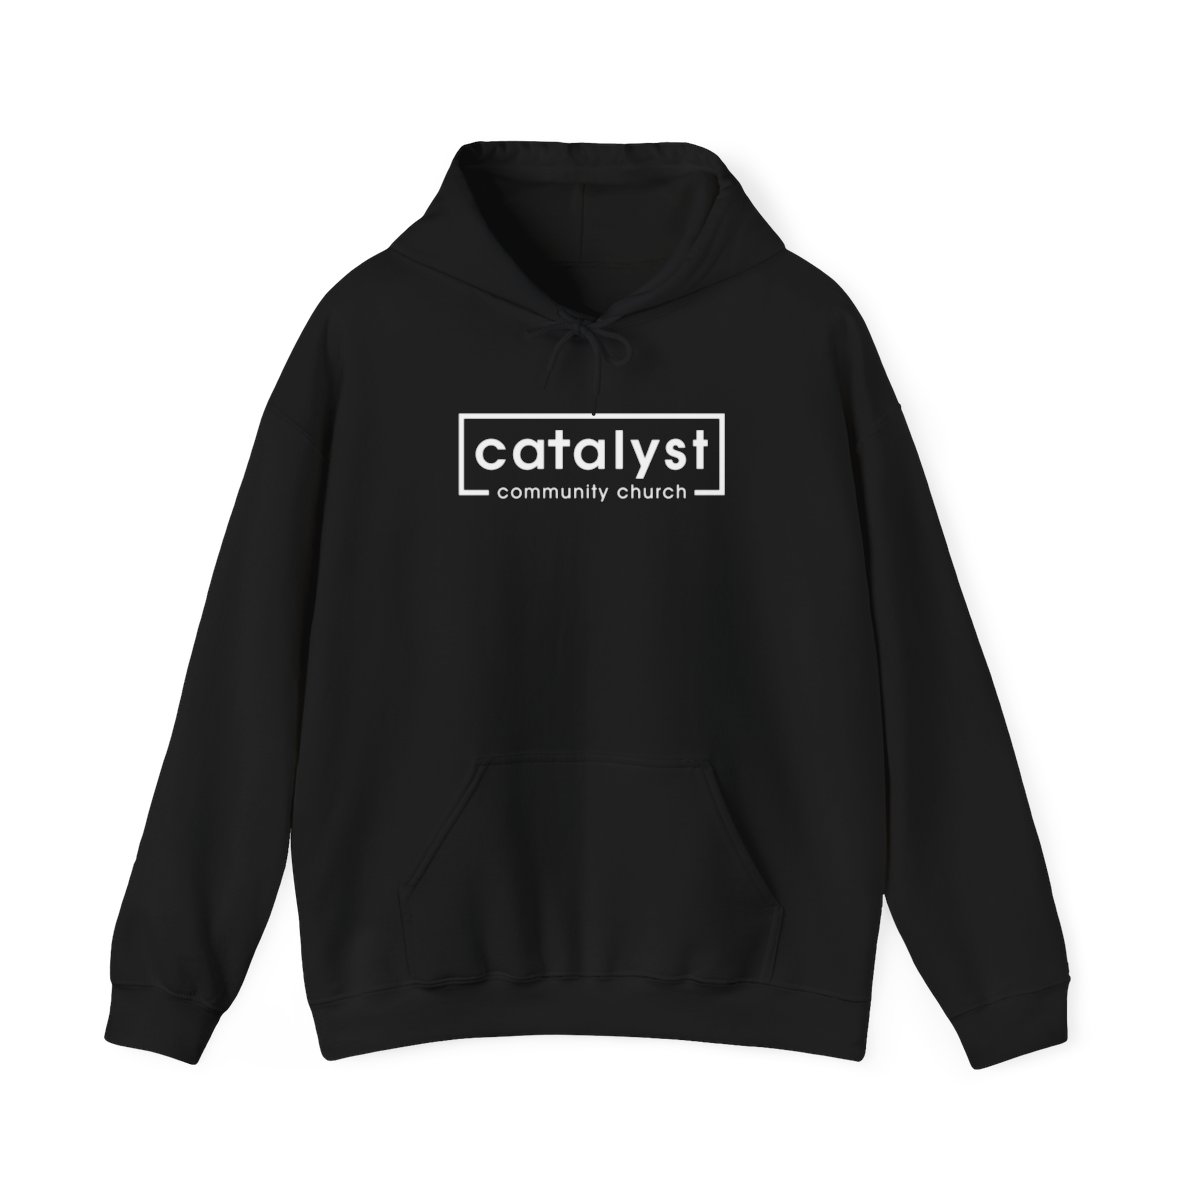 Heavyweight Hoodie product thumbnail image